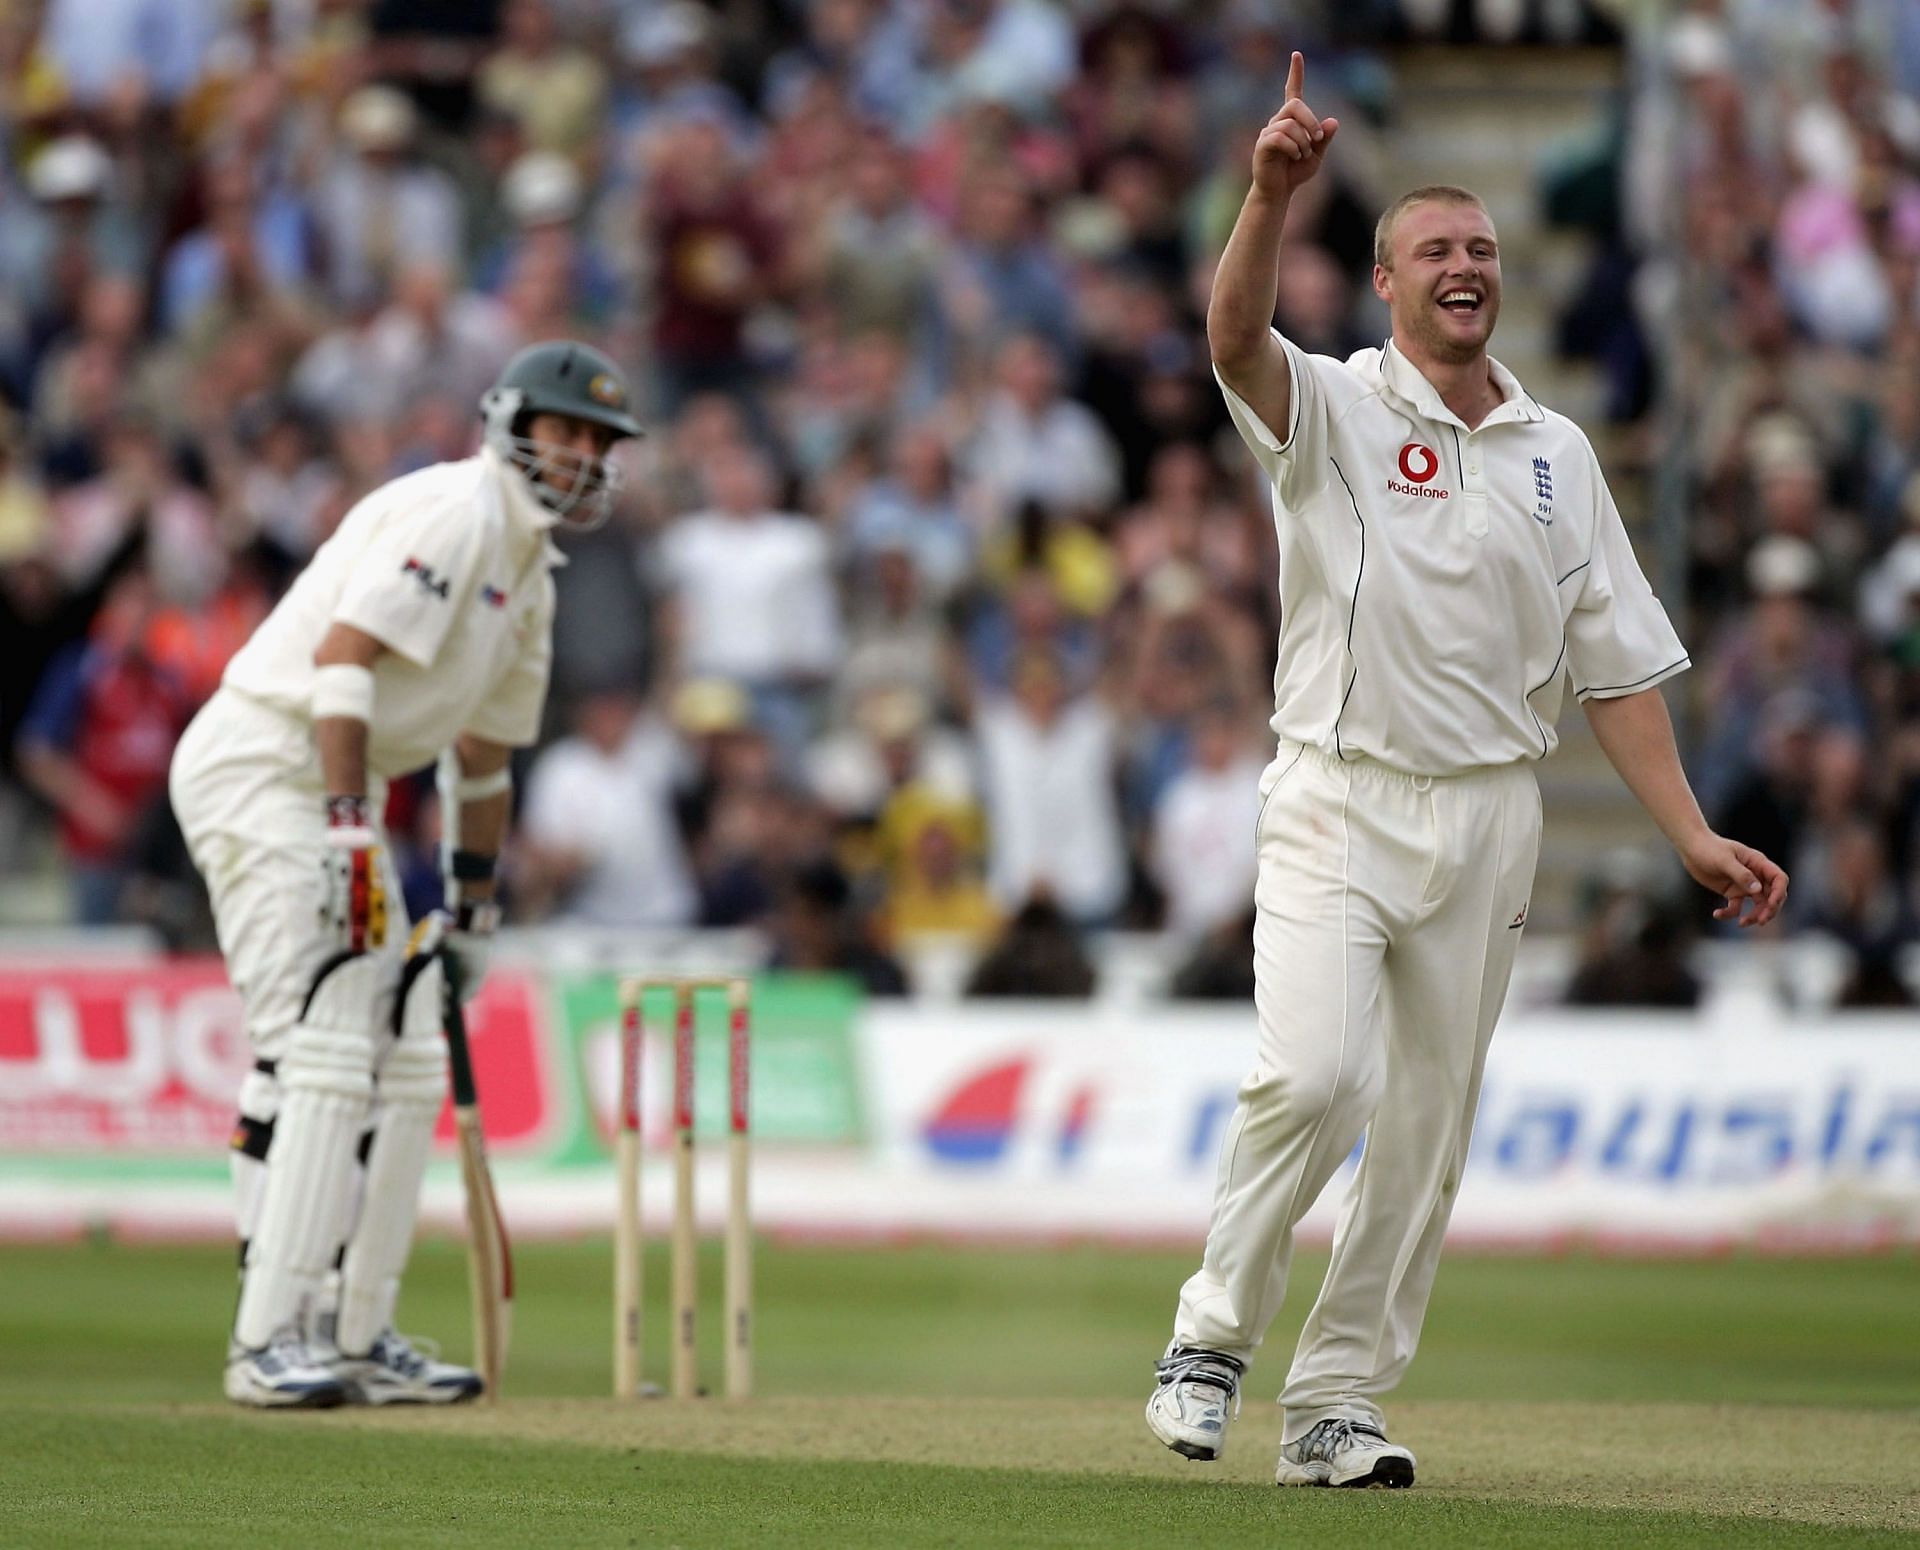 Andrew Flintoff&#039;s heroics in the Edgbaston Test of 2005 are the stuff of folklore!